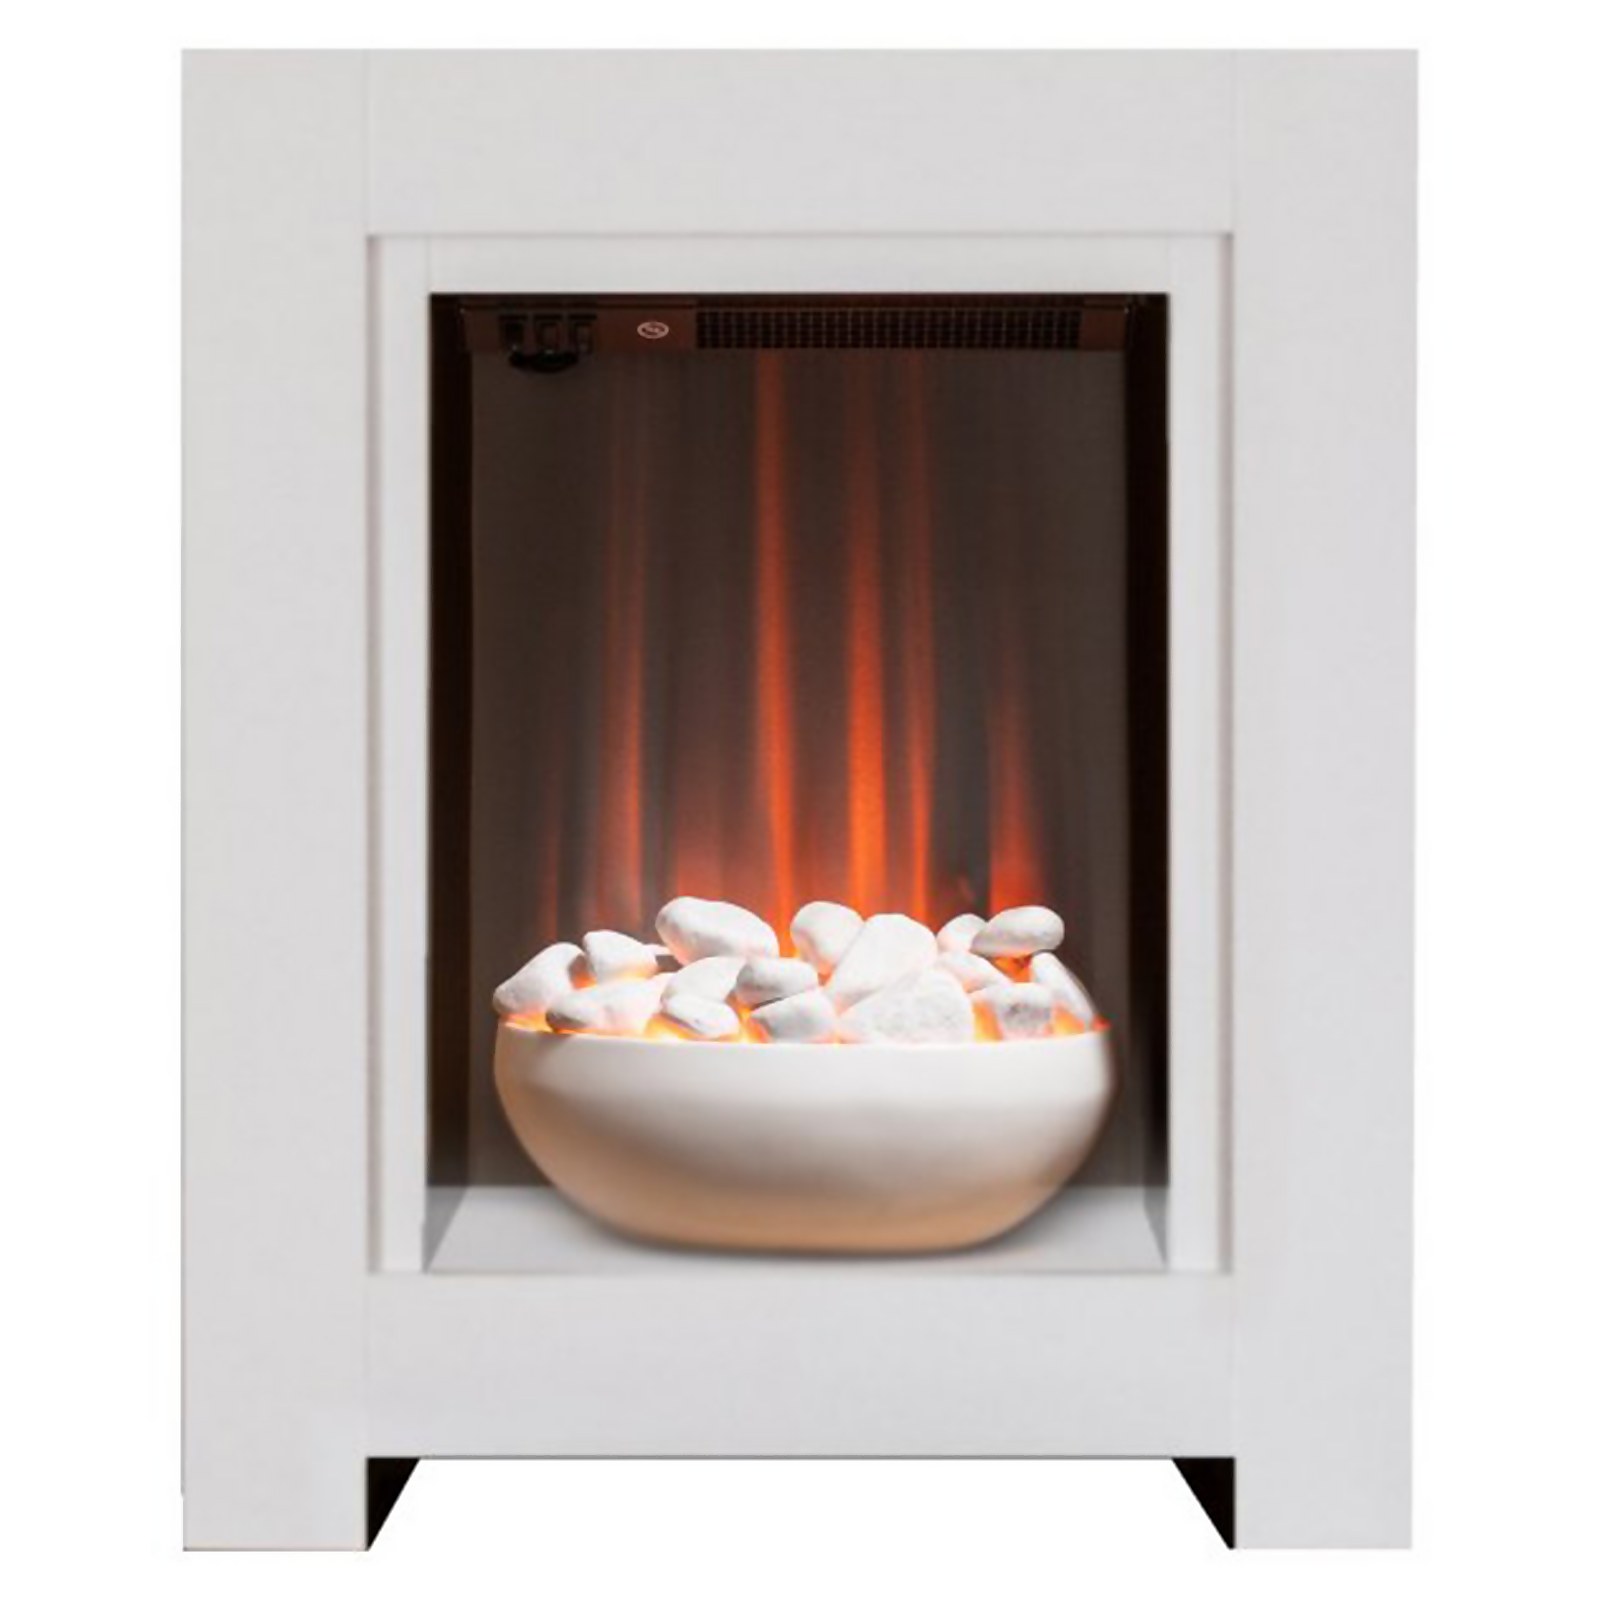 Adam Monet Electric Fire Suite with Flat to Wall Fitting - White